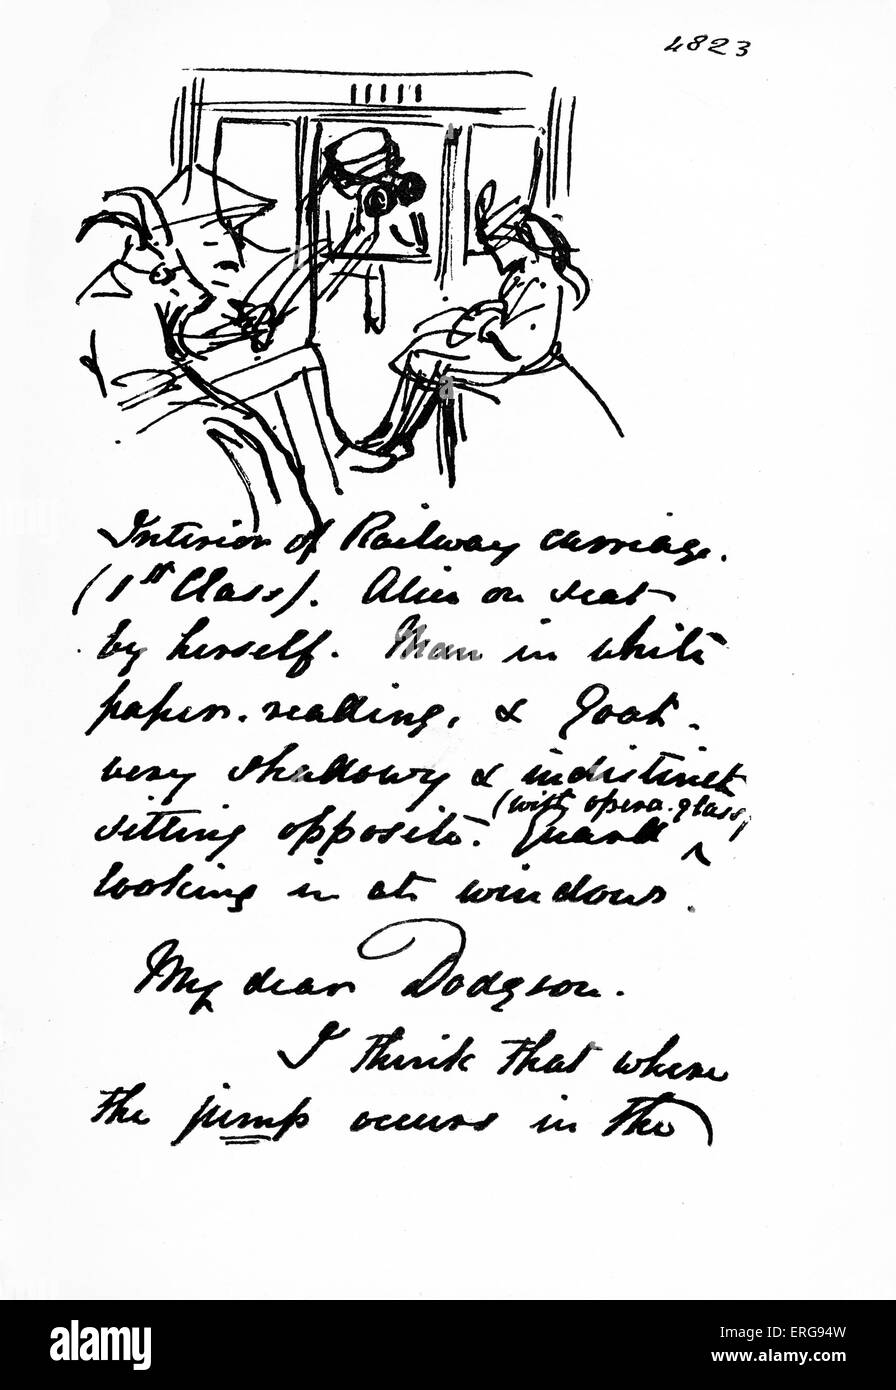 John Tenniel 's letter to Lewis Carroll, 1 June 1870. With desciption of his illustration ideas for Alice Through the Looking Stock Photo